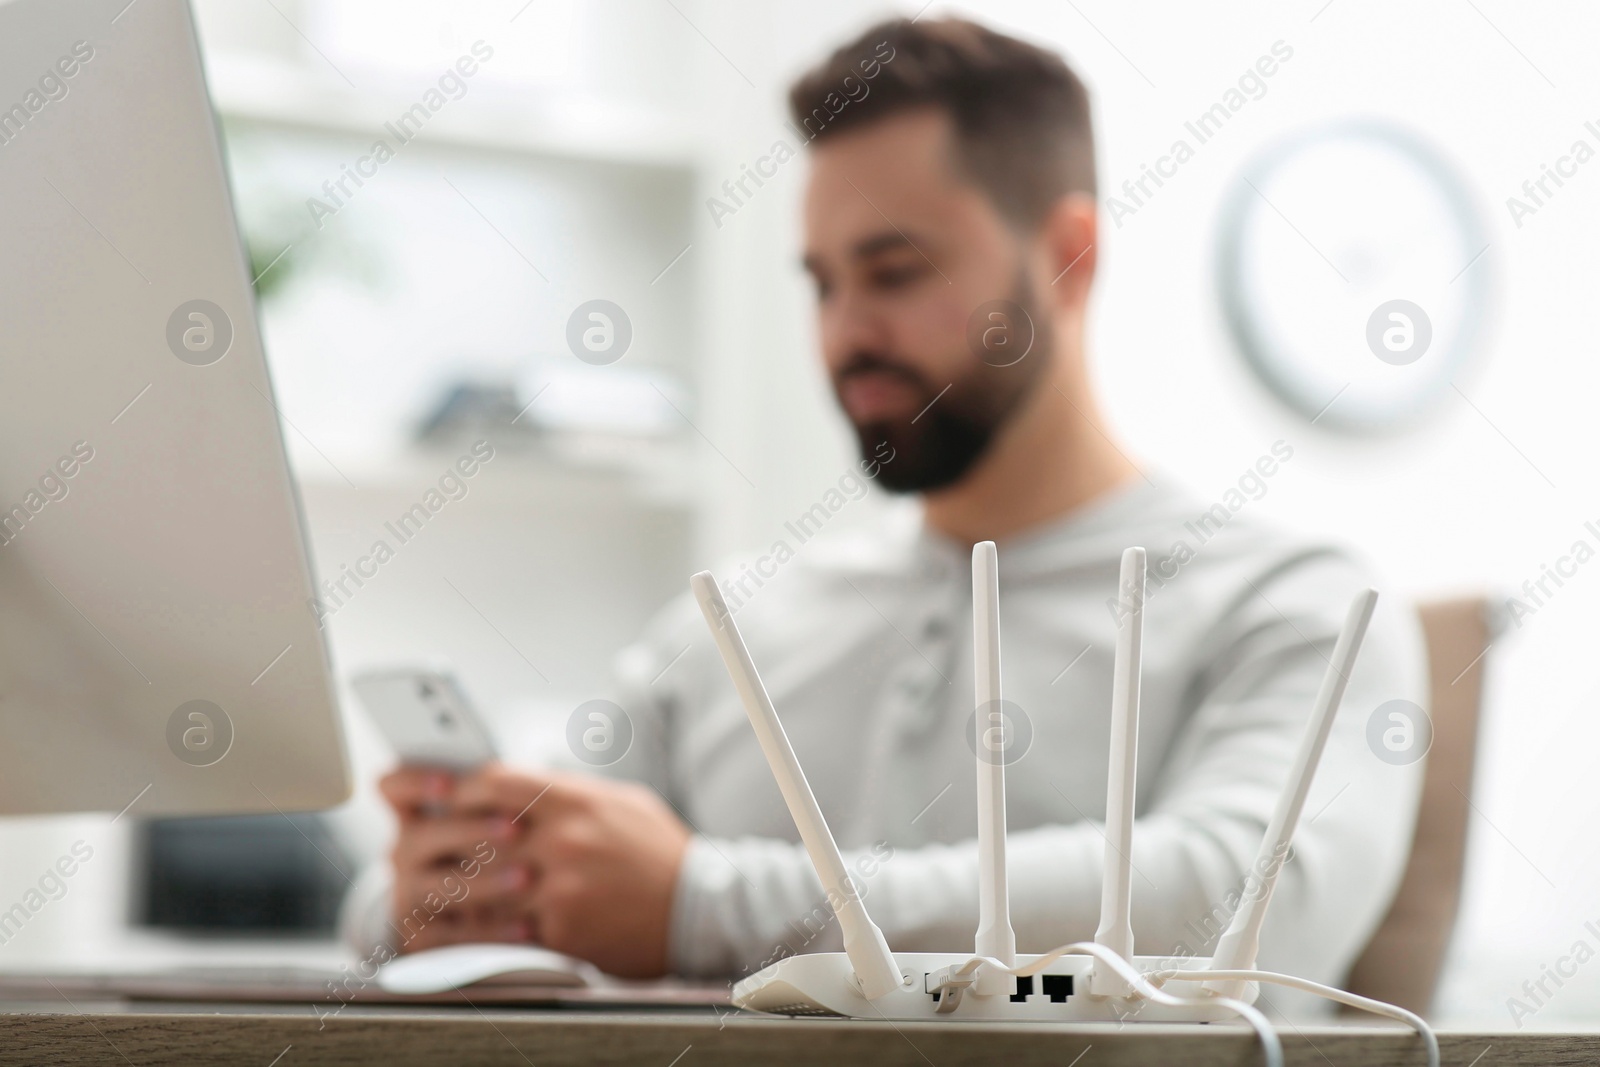 Photo of Man with smartphone working at wooden table indoors, focus on Wi-Fi router